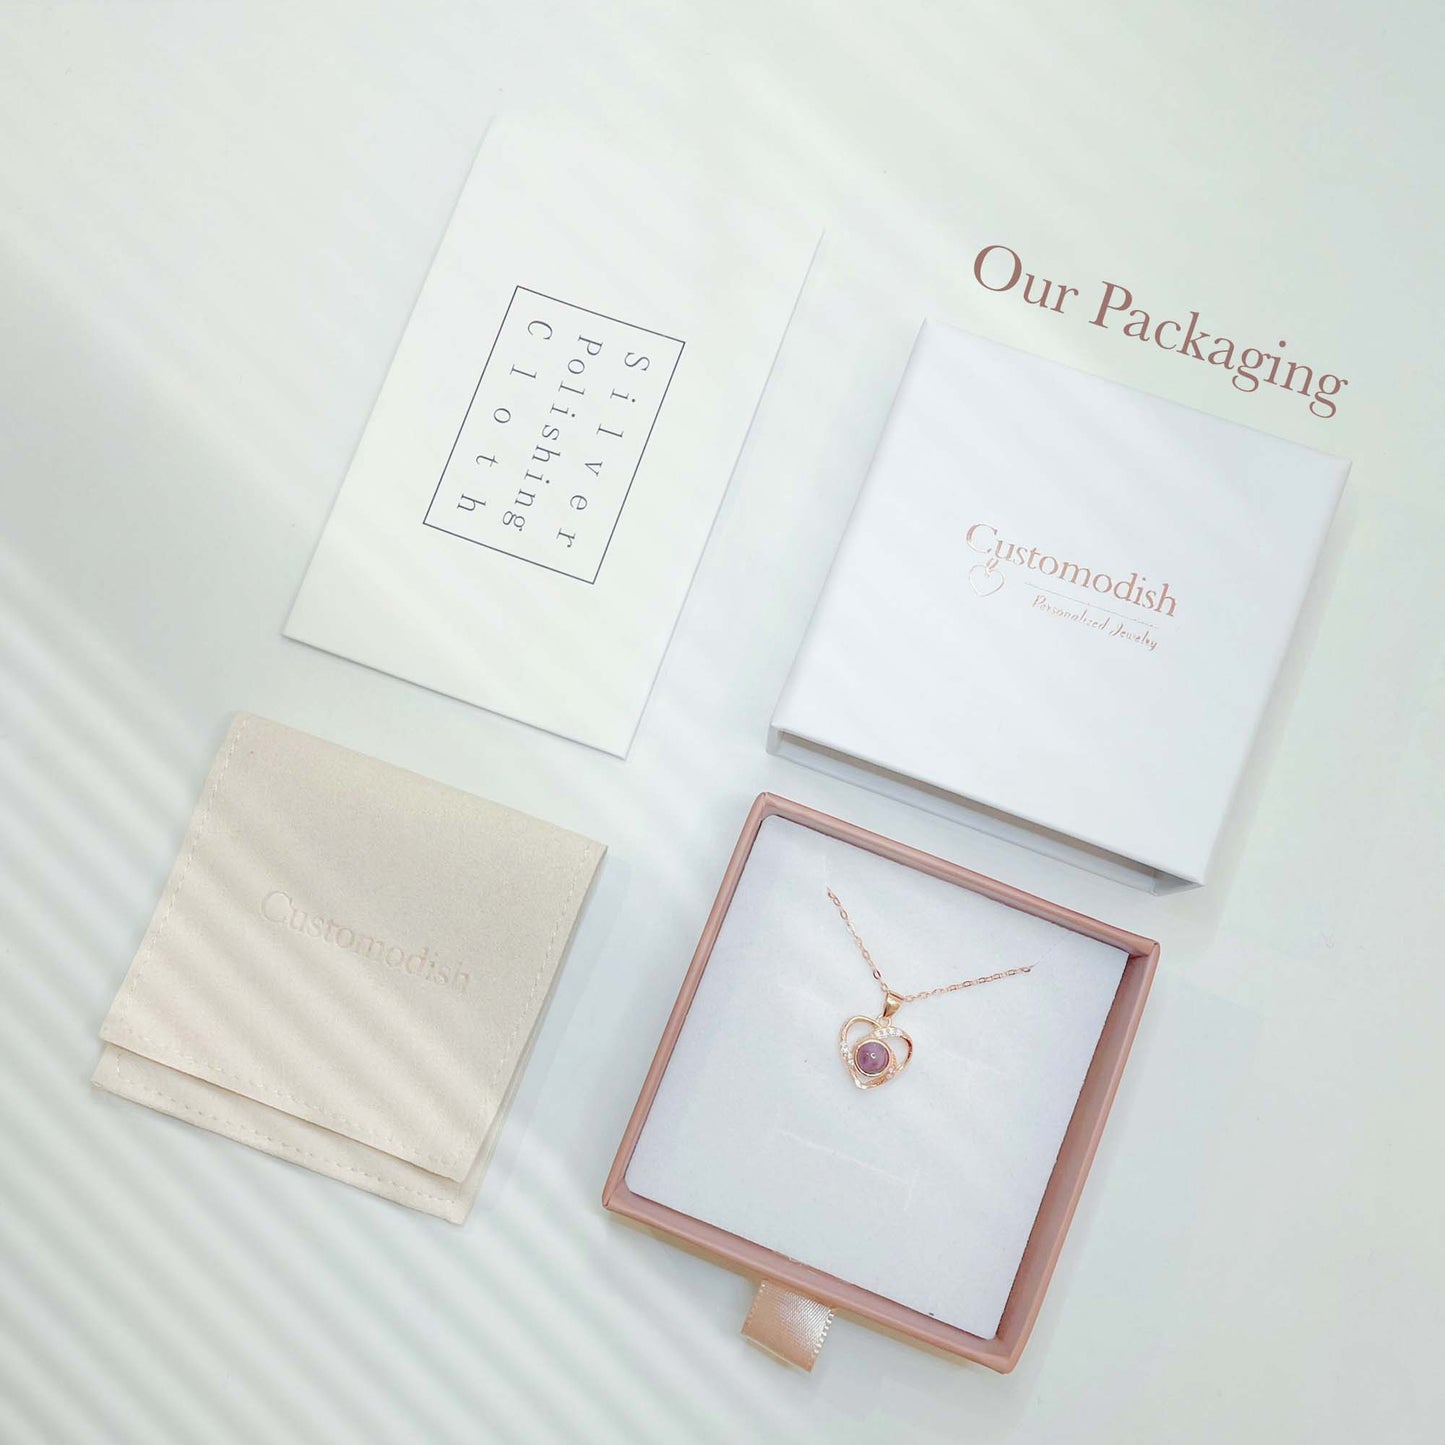 We provide nice packaging for each personalized projection necklace!